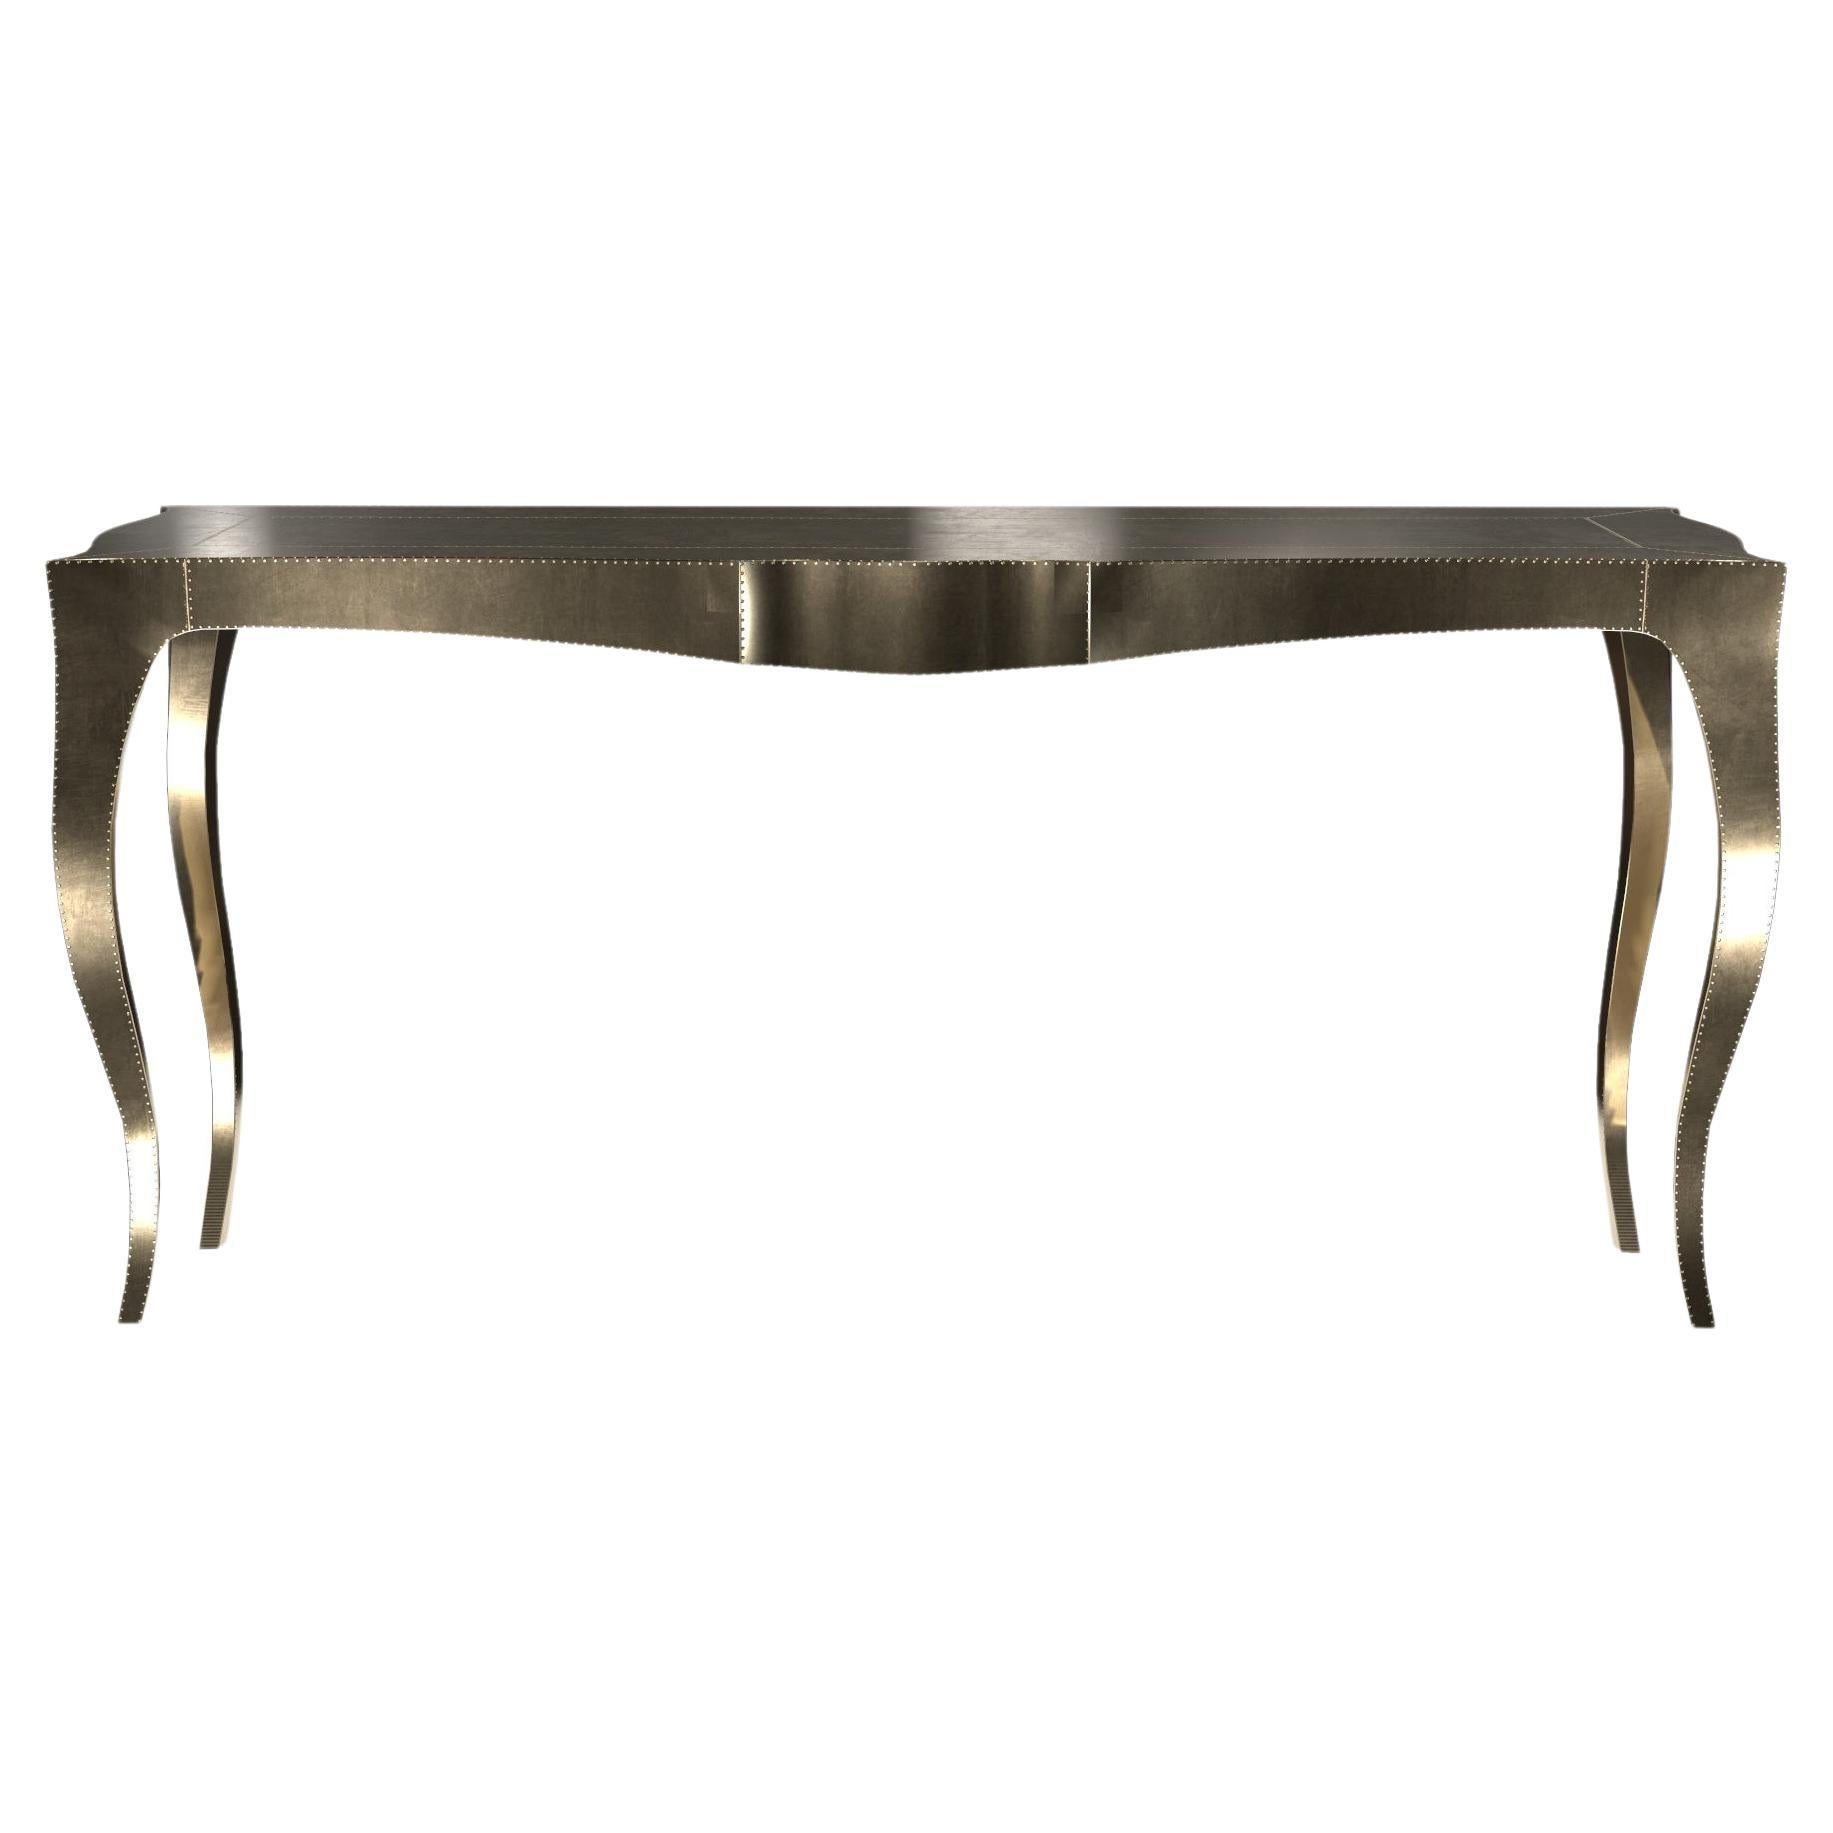 Louise Console Art Deco Industrial and Work Tables Smooth Brass by Paul Mathieu For Sale